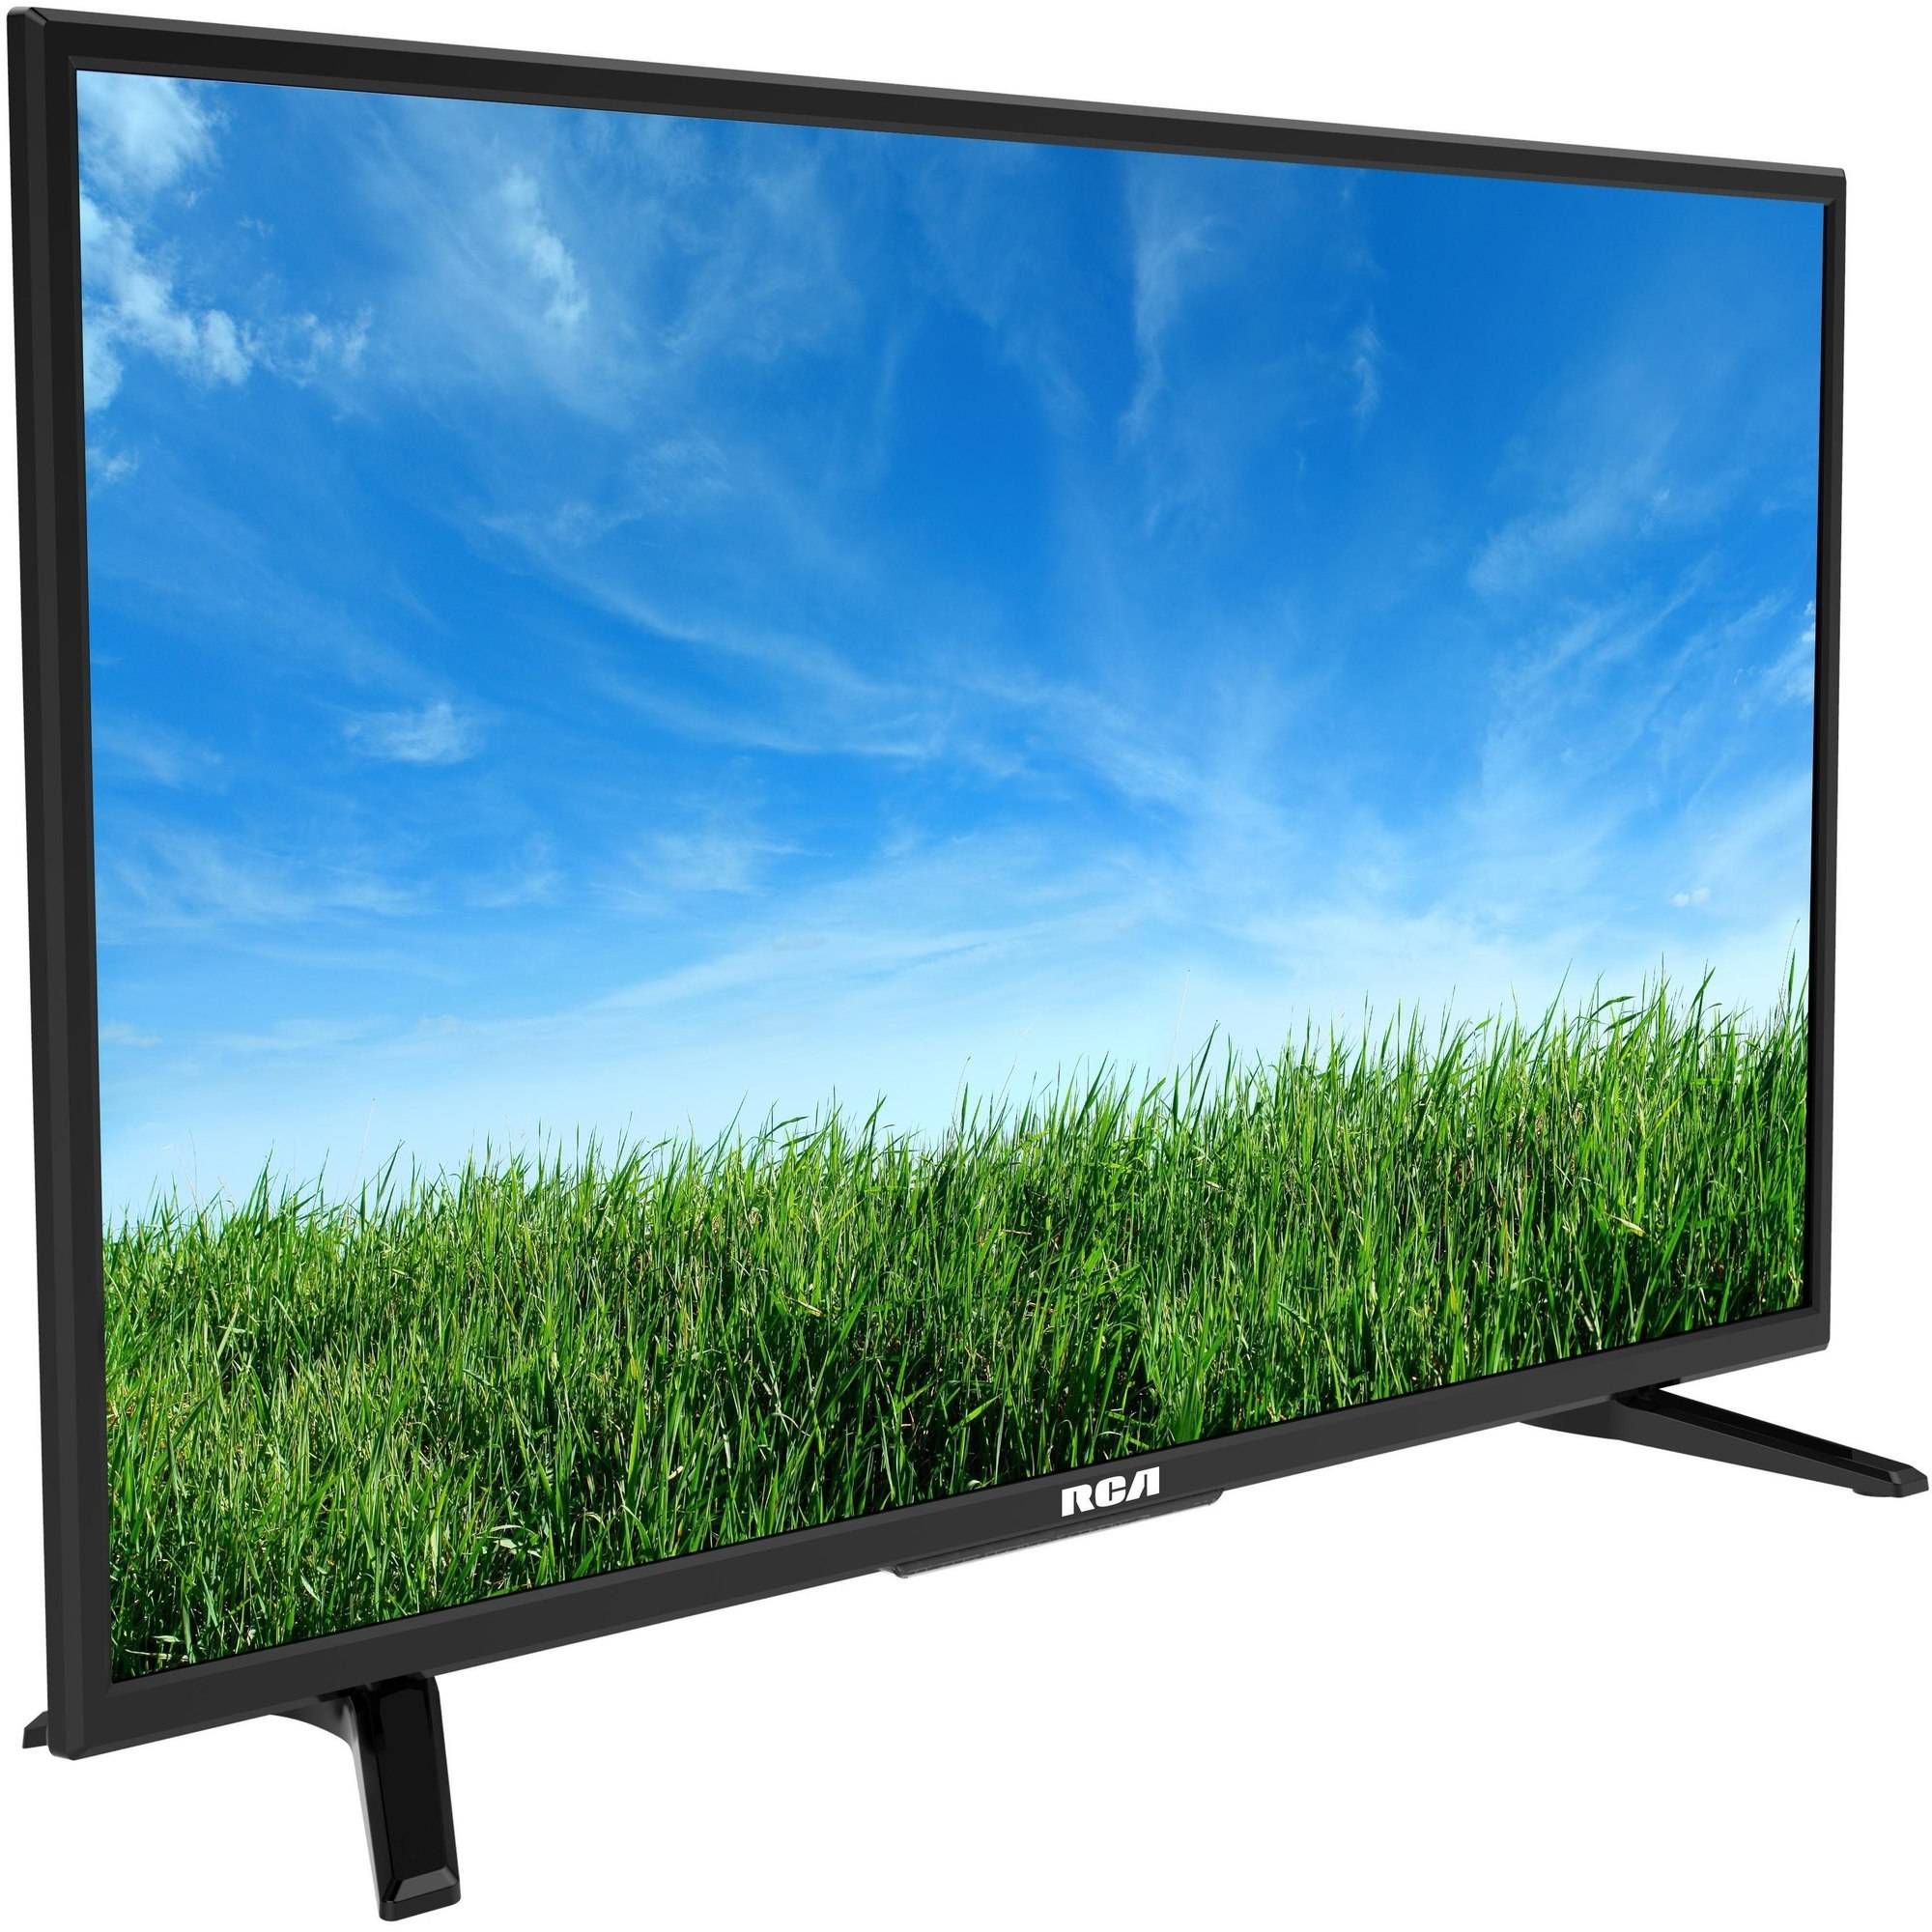 RCA 32" Class HD (720P) LED TV with Built-in DVD Player (RLDEDV3255-A) - image 3 of 8